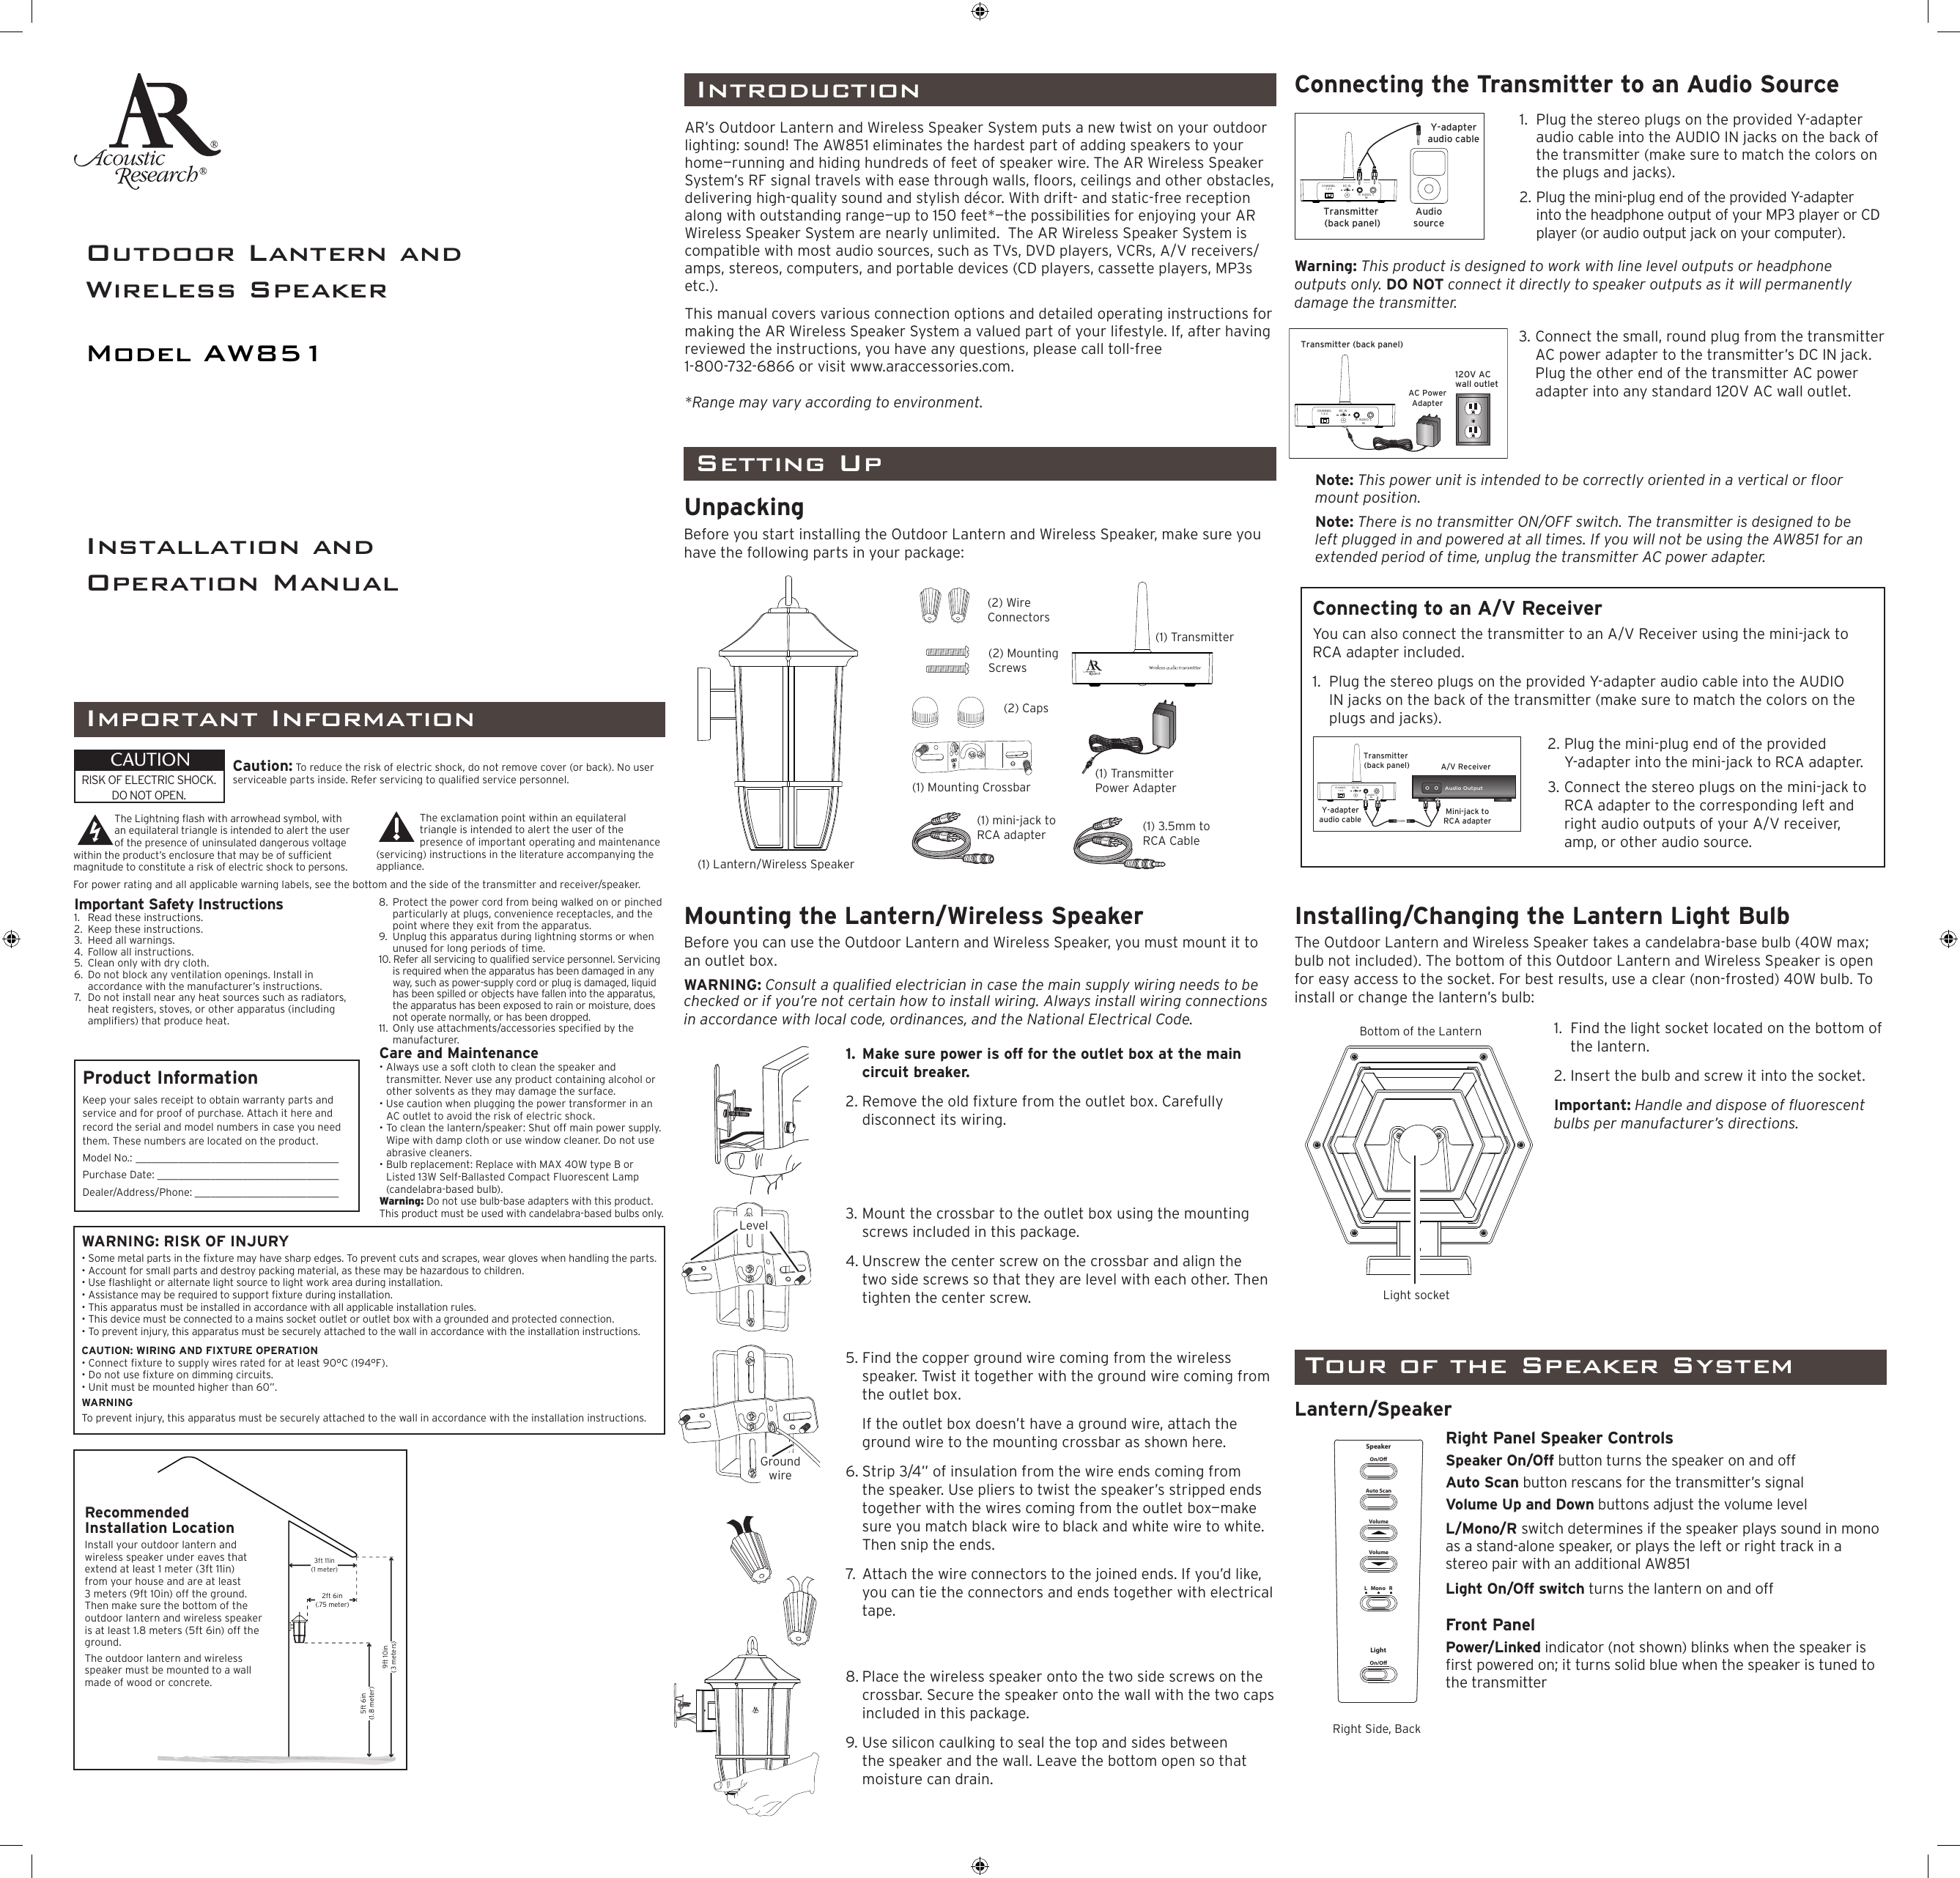 Page 1 of 2 - Acoustic-Research Acoustic-Research-Aw851-Users-Manual- AW851_US_IB_00  Acoustic-research-aw851-users-manual